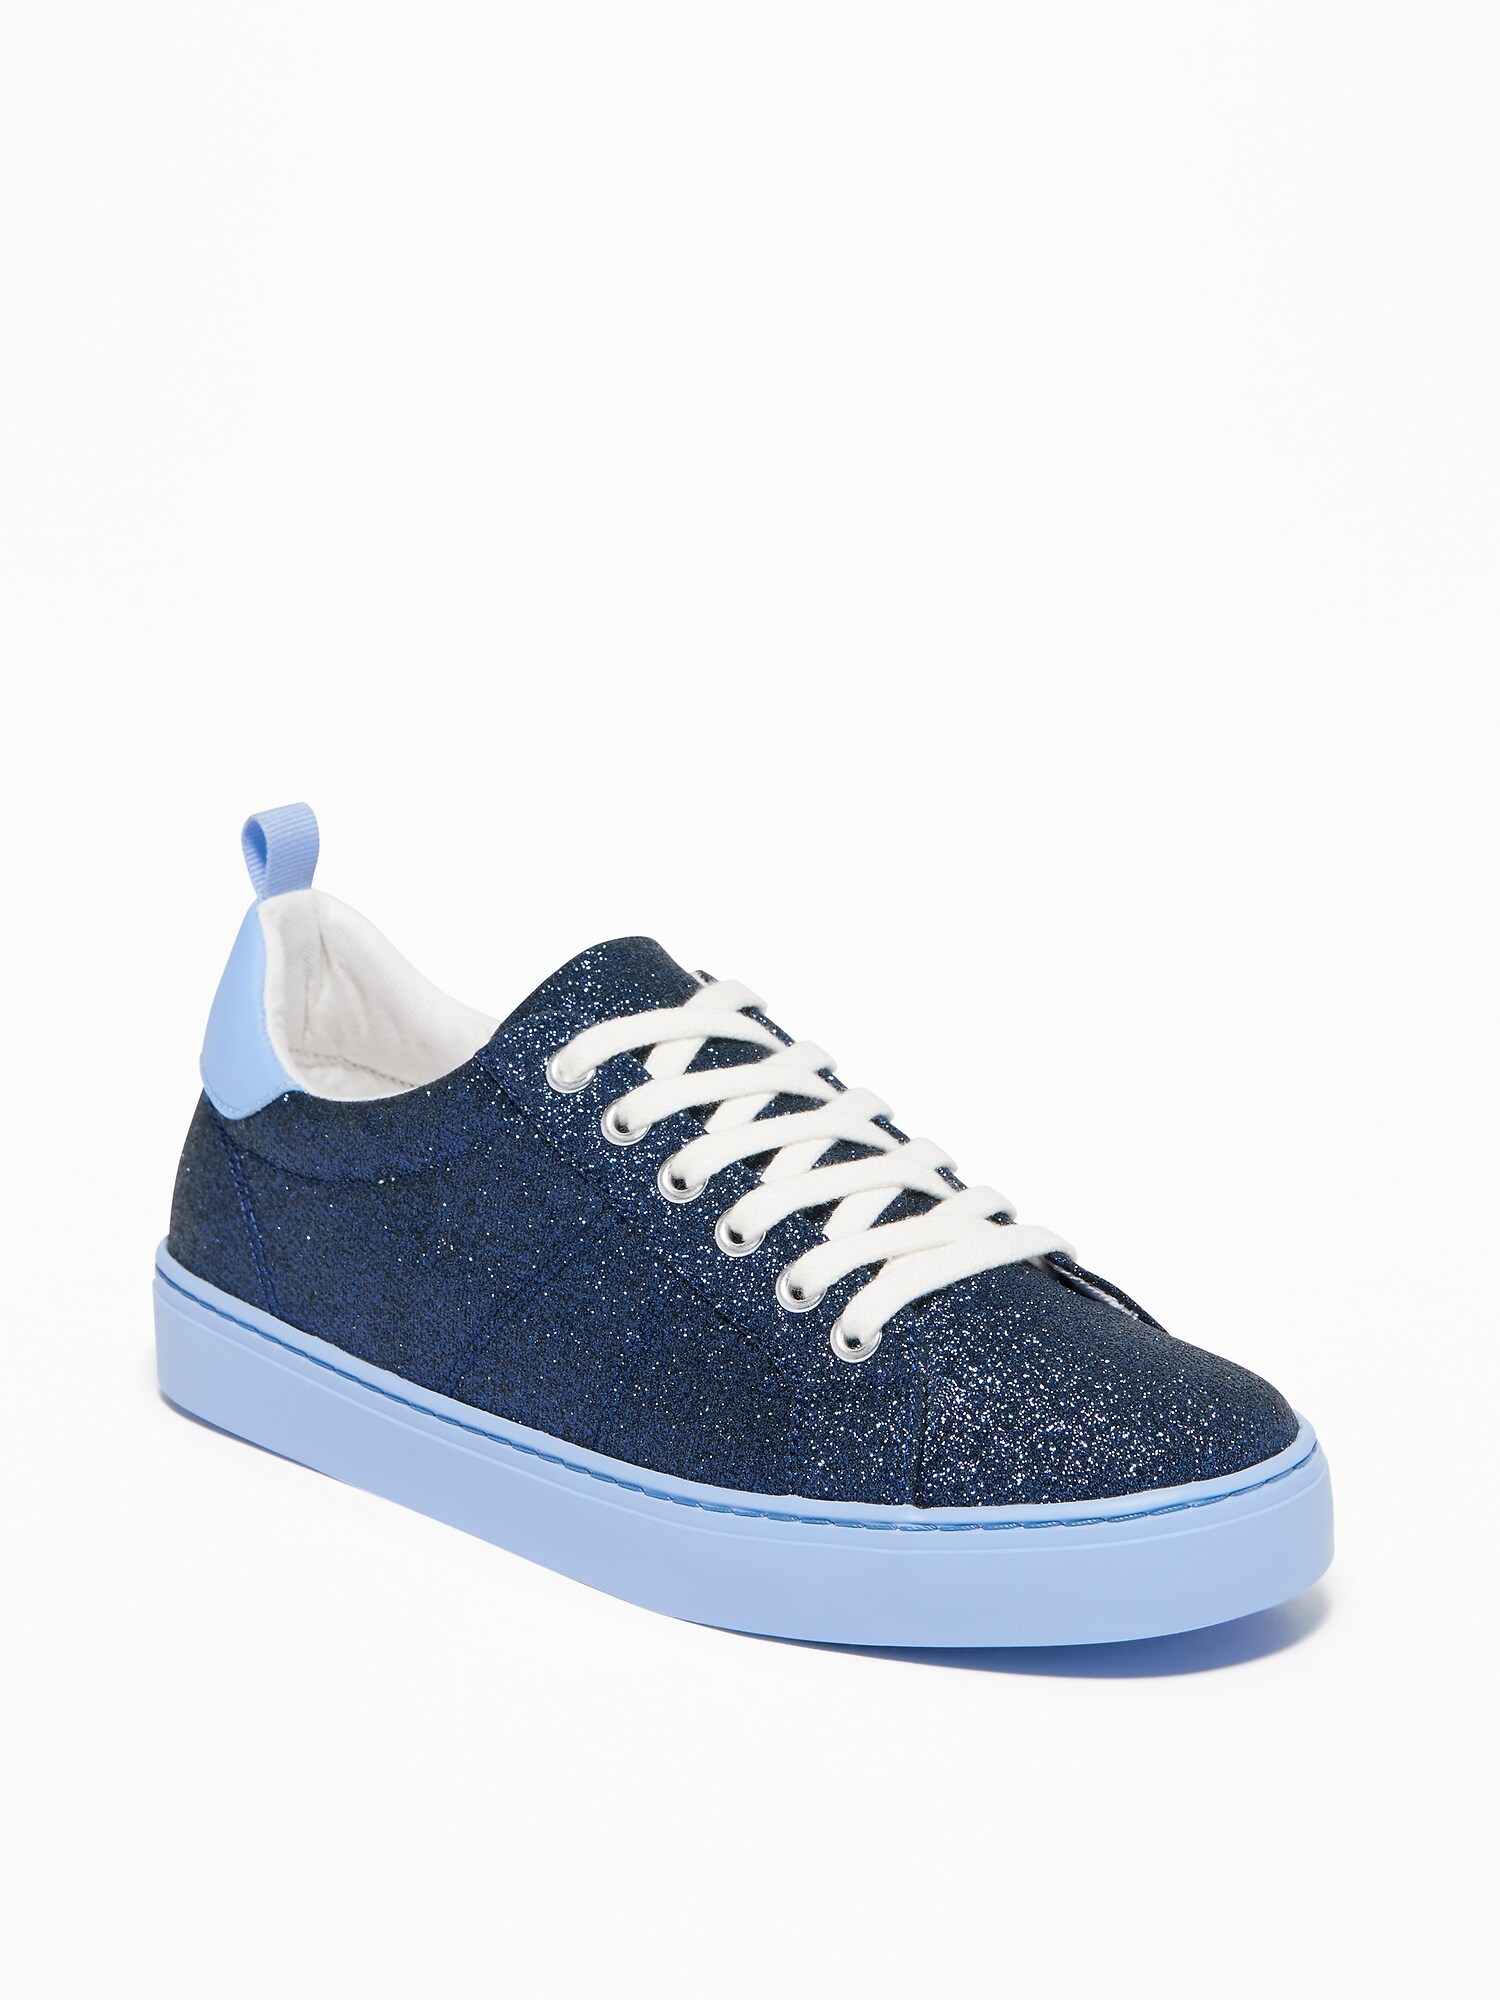 Glitter-Covered Sneakers for Girls | Old Navy